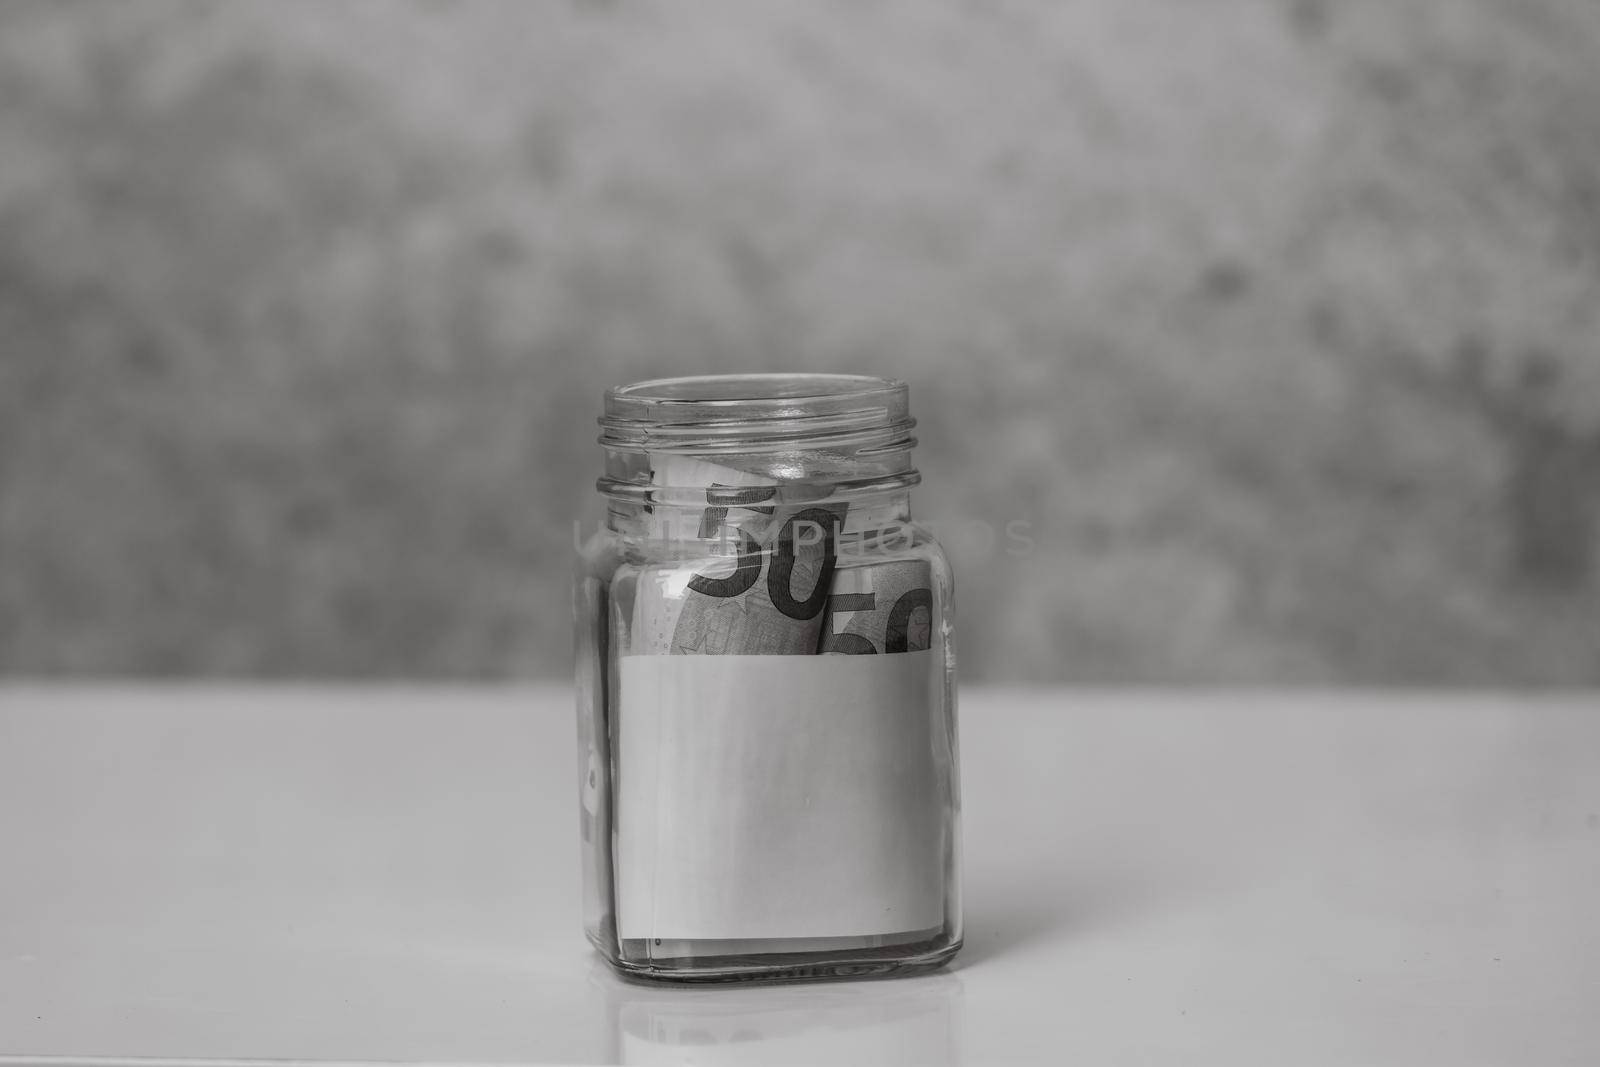 Composition with saving money banknotes (50 EURO) in a glass jar with empty white label or note for your text. Concept of investing and keeping money, close up isolated.